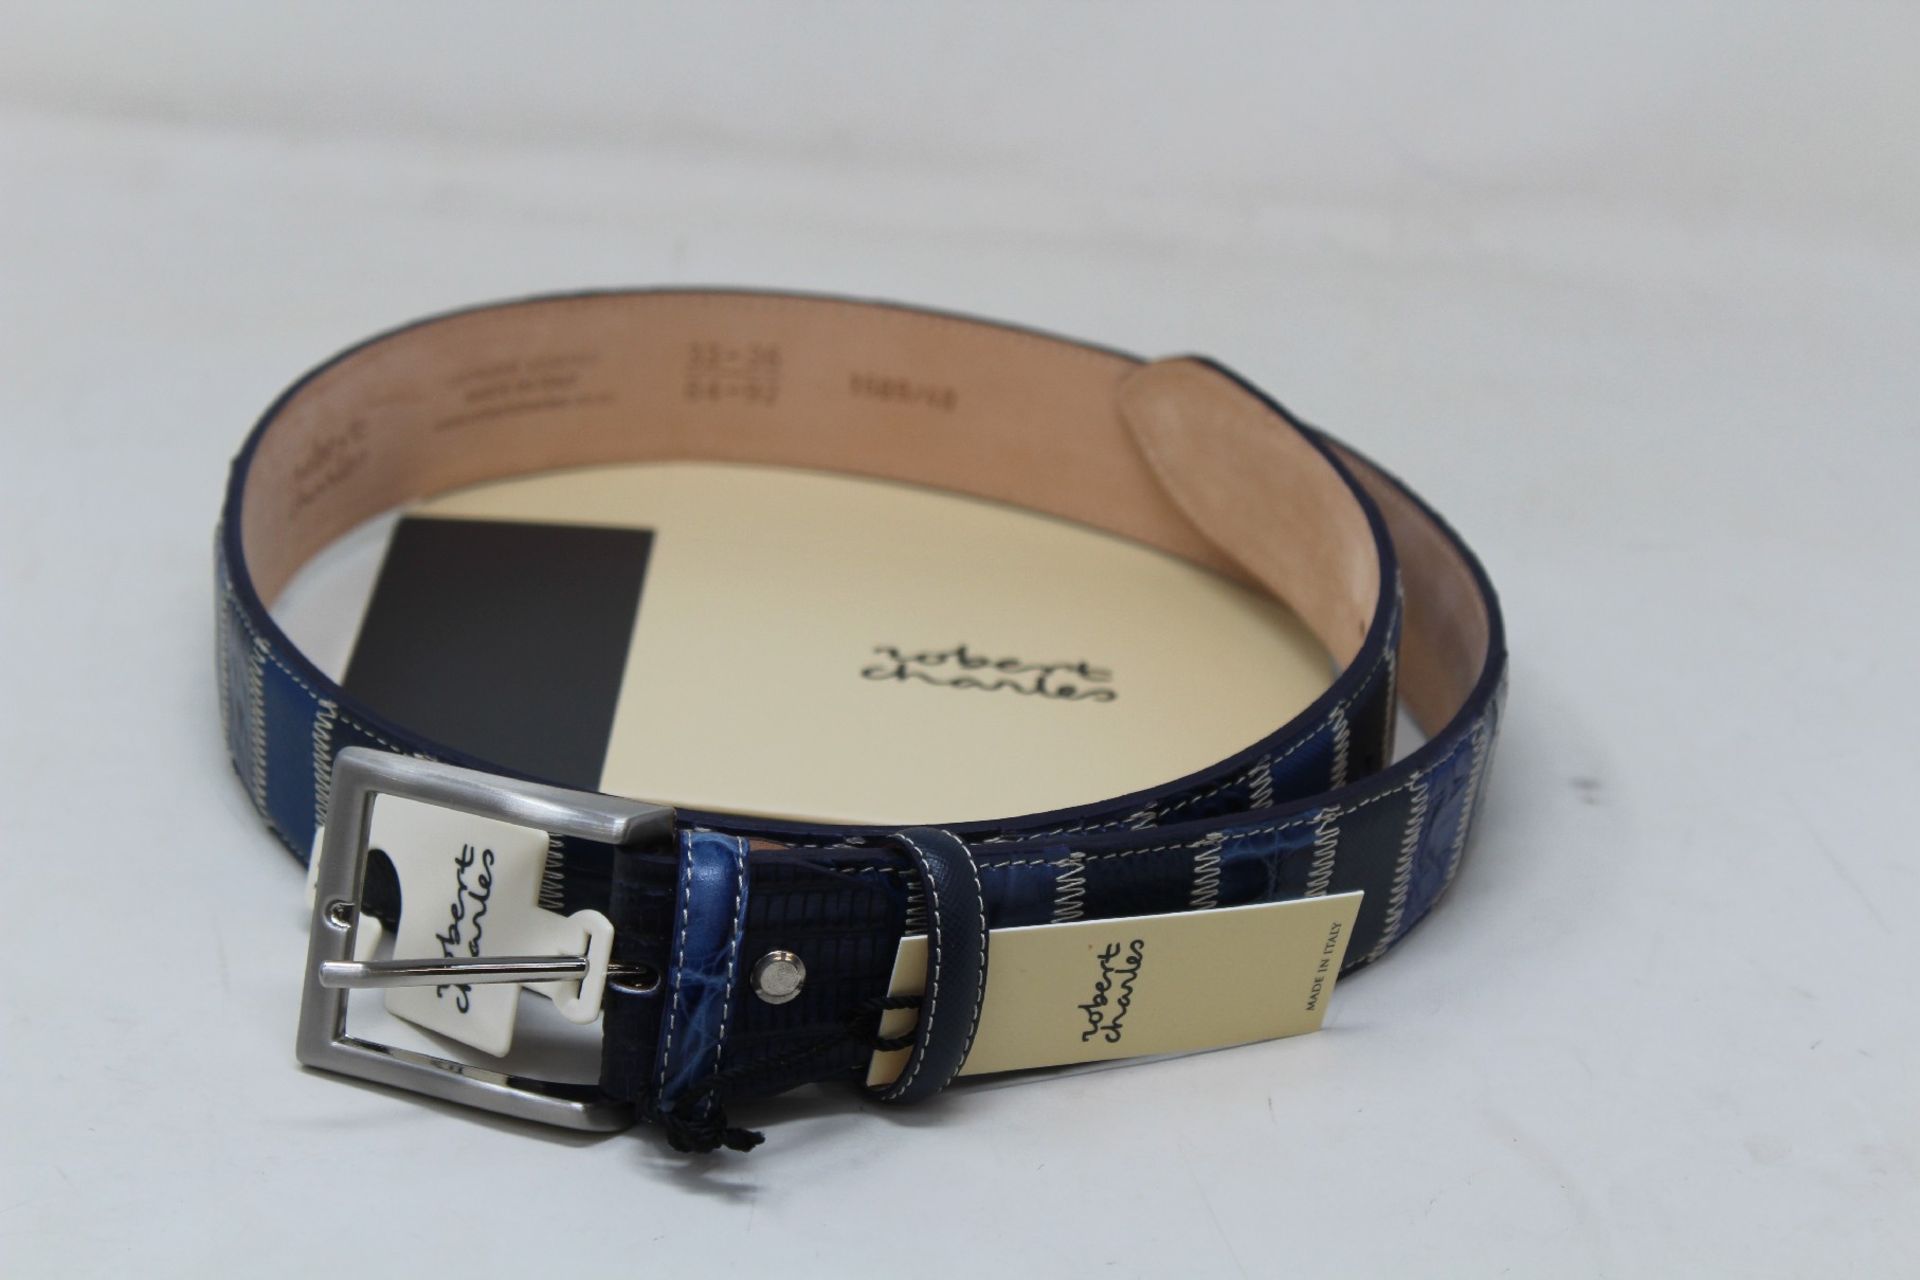 Seventeen men's as new Robert Charles Leather Patchwork Belts (7 blue, 10 brown, various sizes).